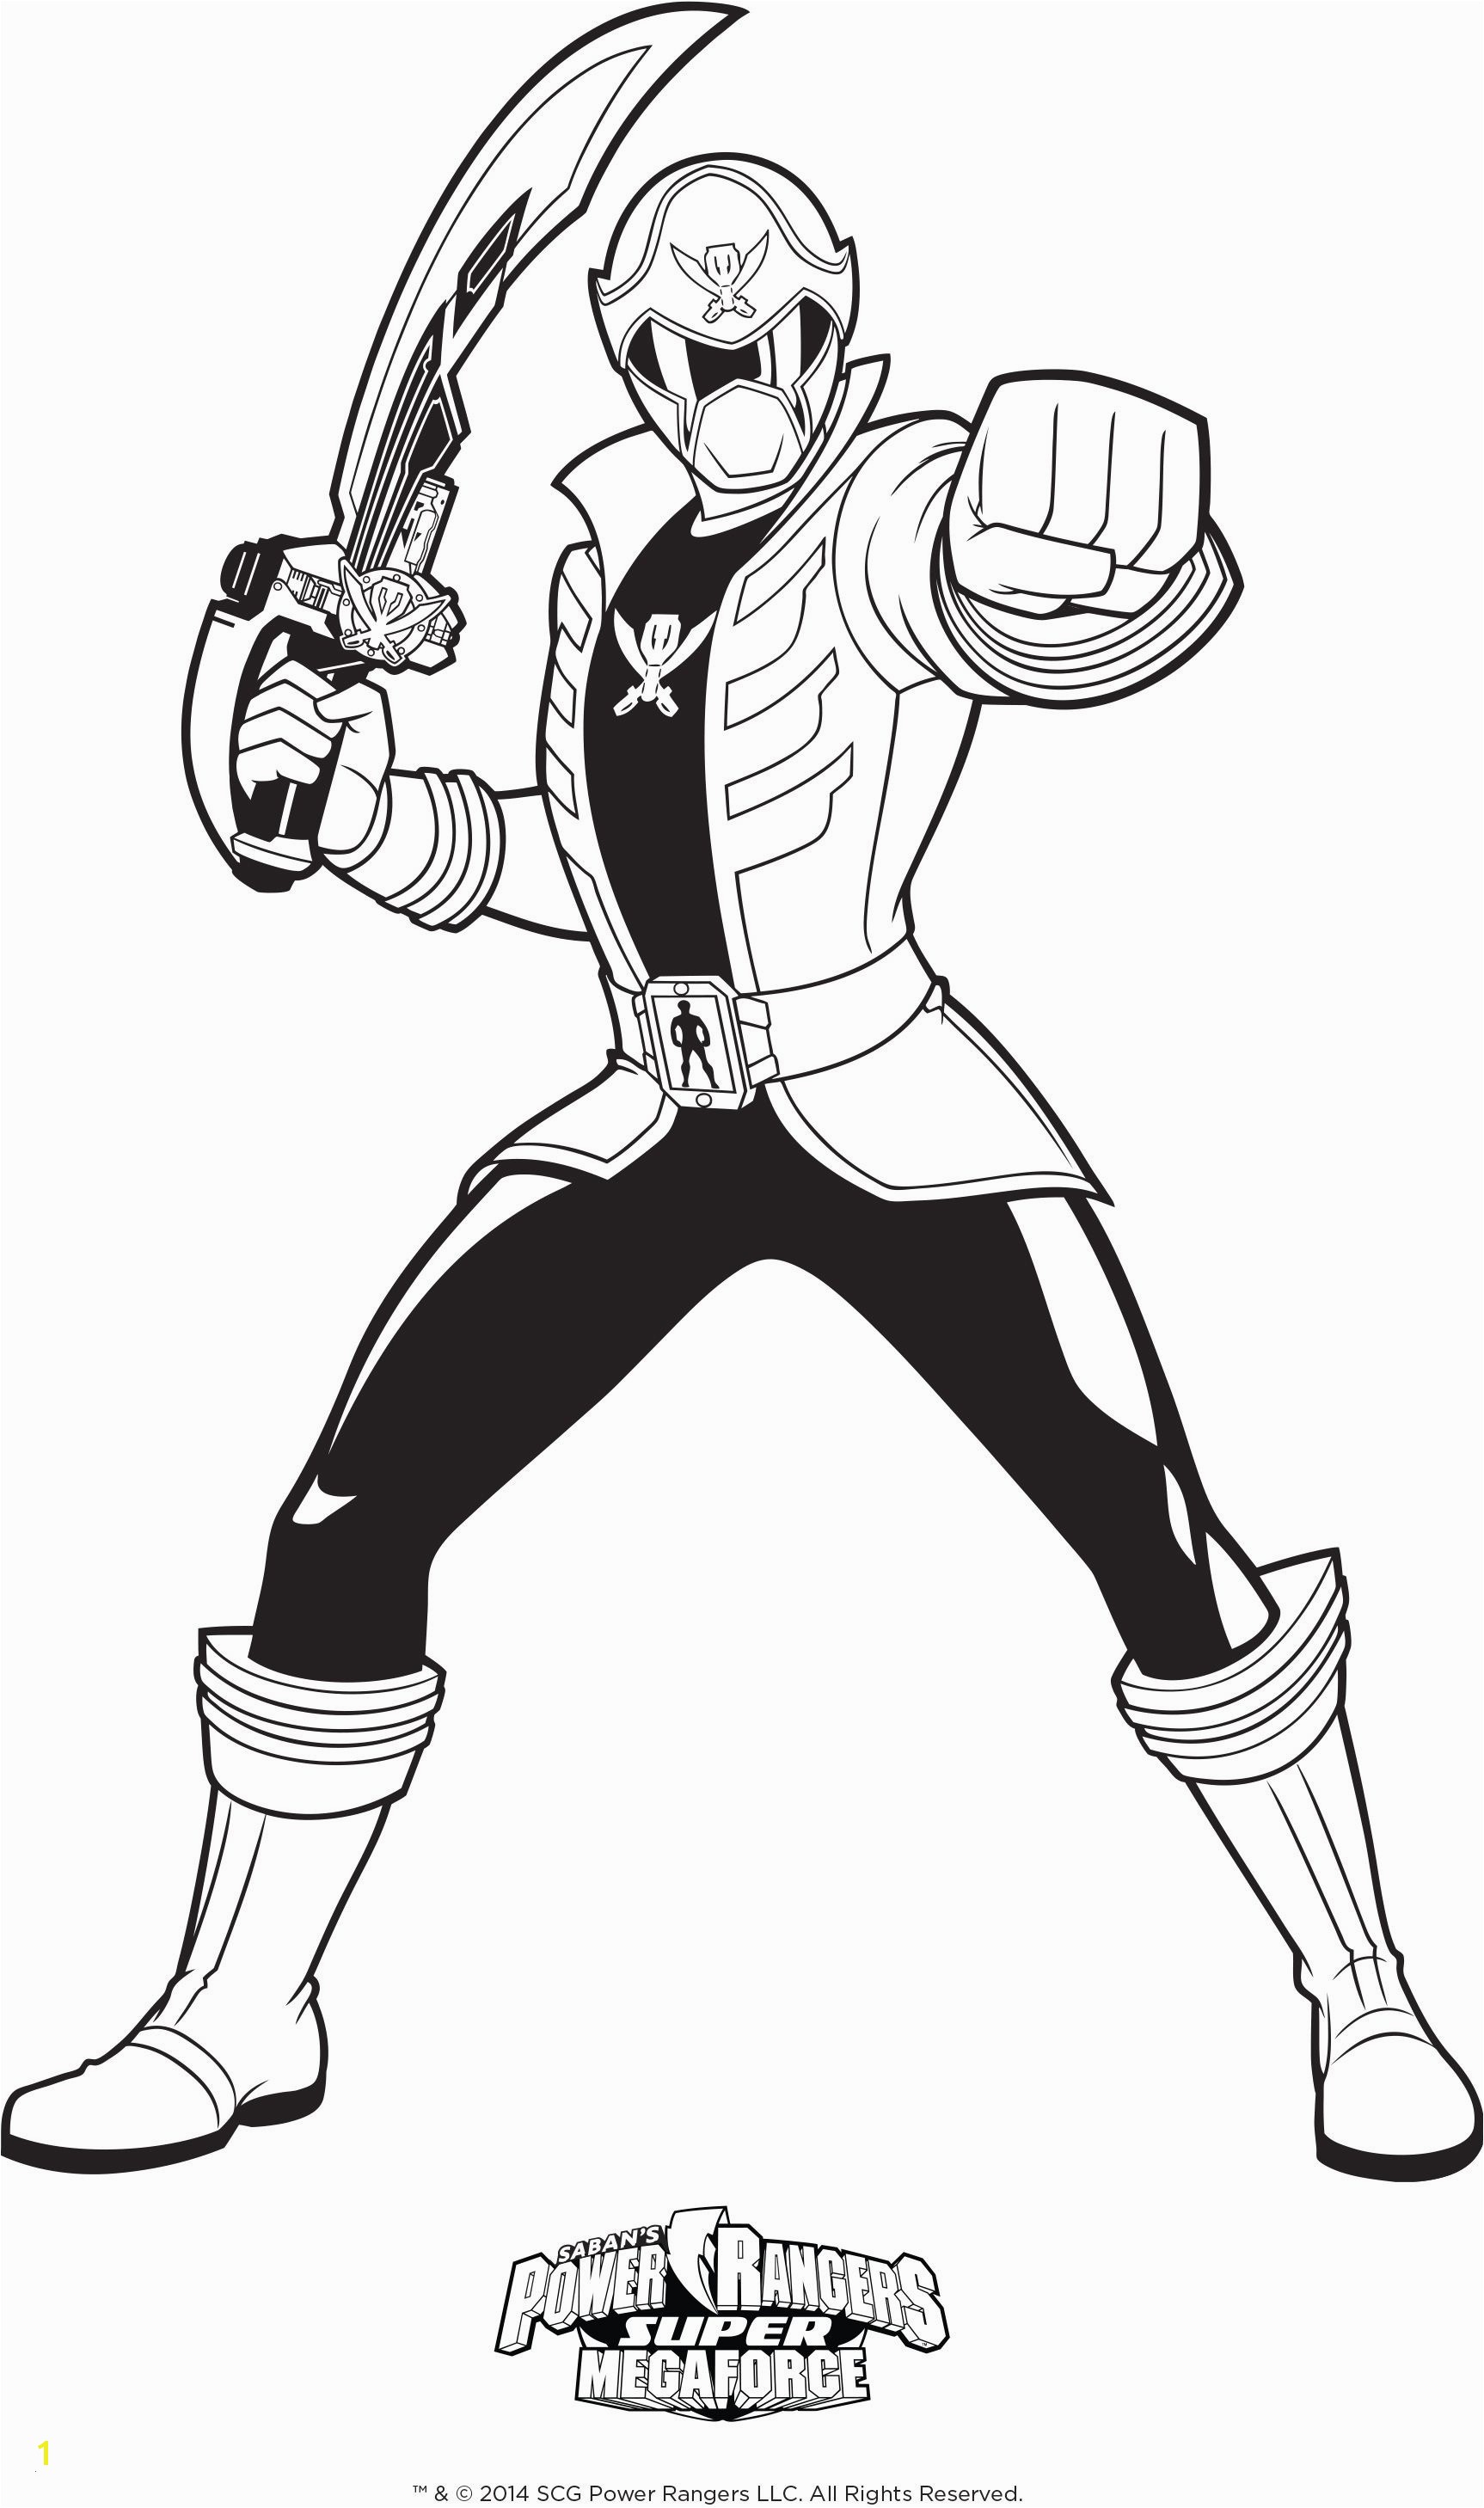 Green Power Ranger Coloring Page Power Rangers Coloring Pages Nice Power Rangers Coloring Pages